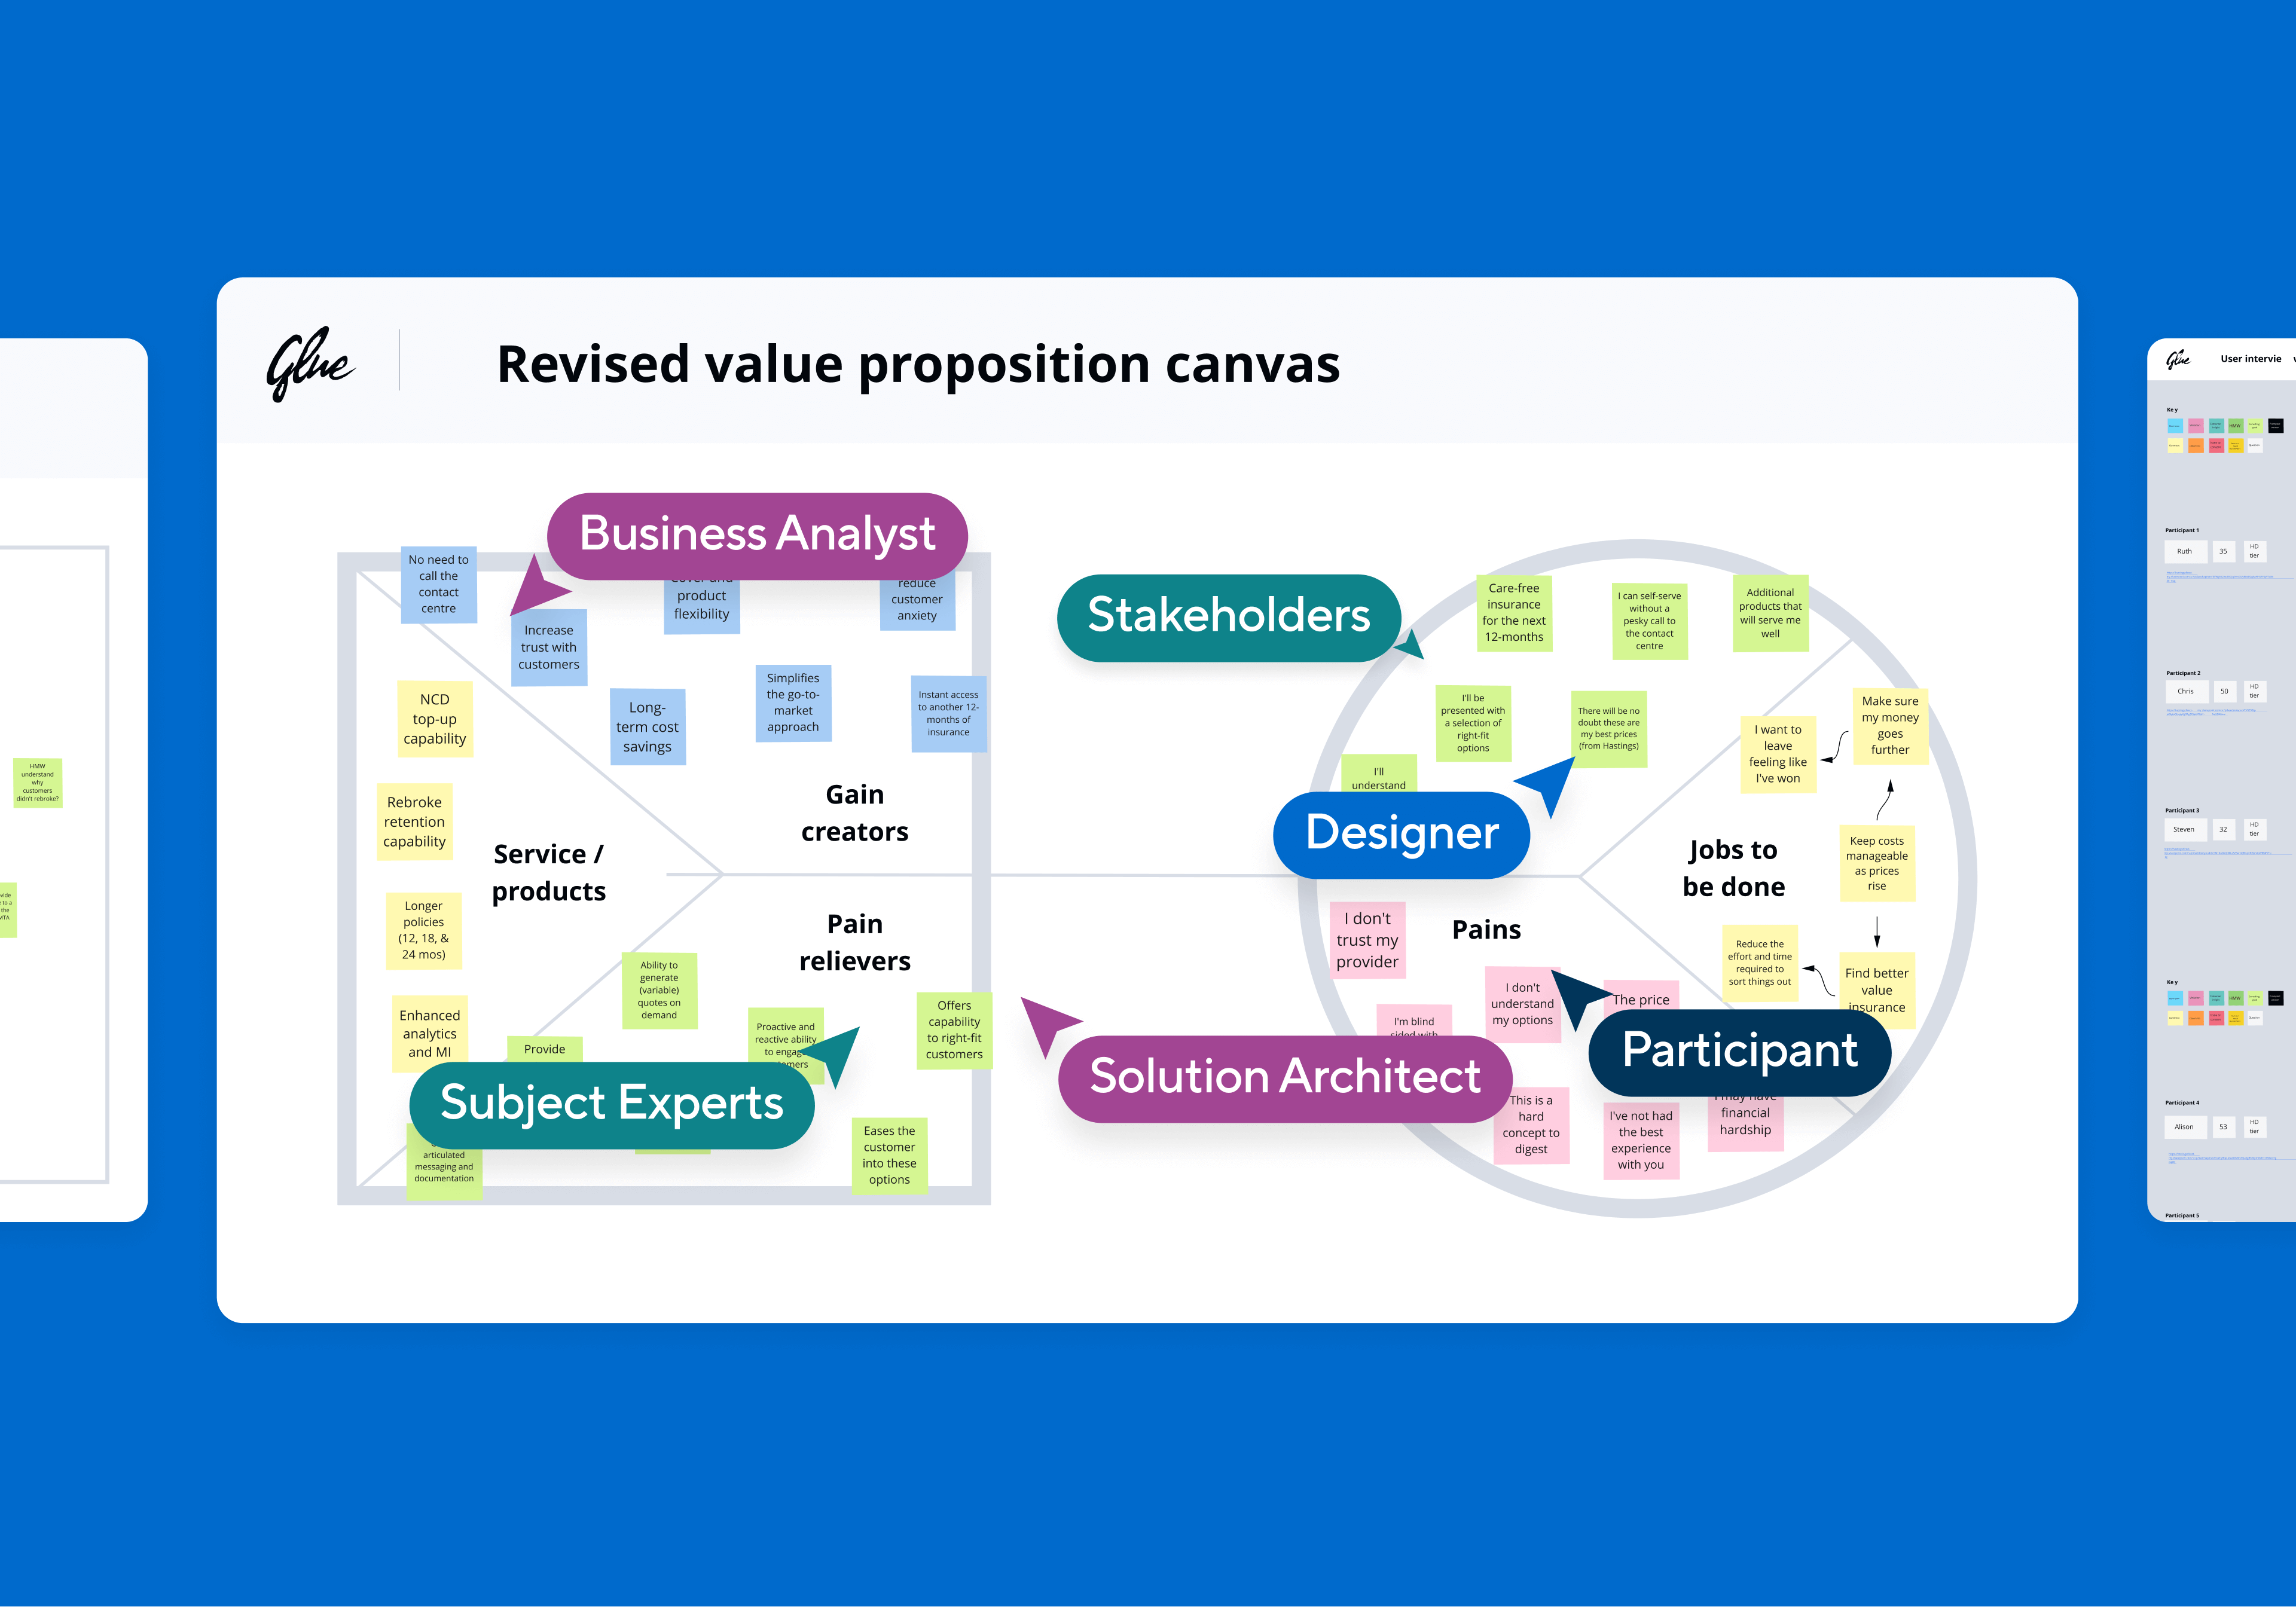 A slide showing stakeholders reviewing the revised value proposition canvas that shows users jobs to be done, pains and gains and the pains, gains and services of the product